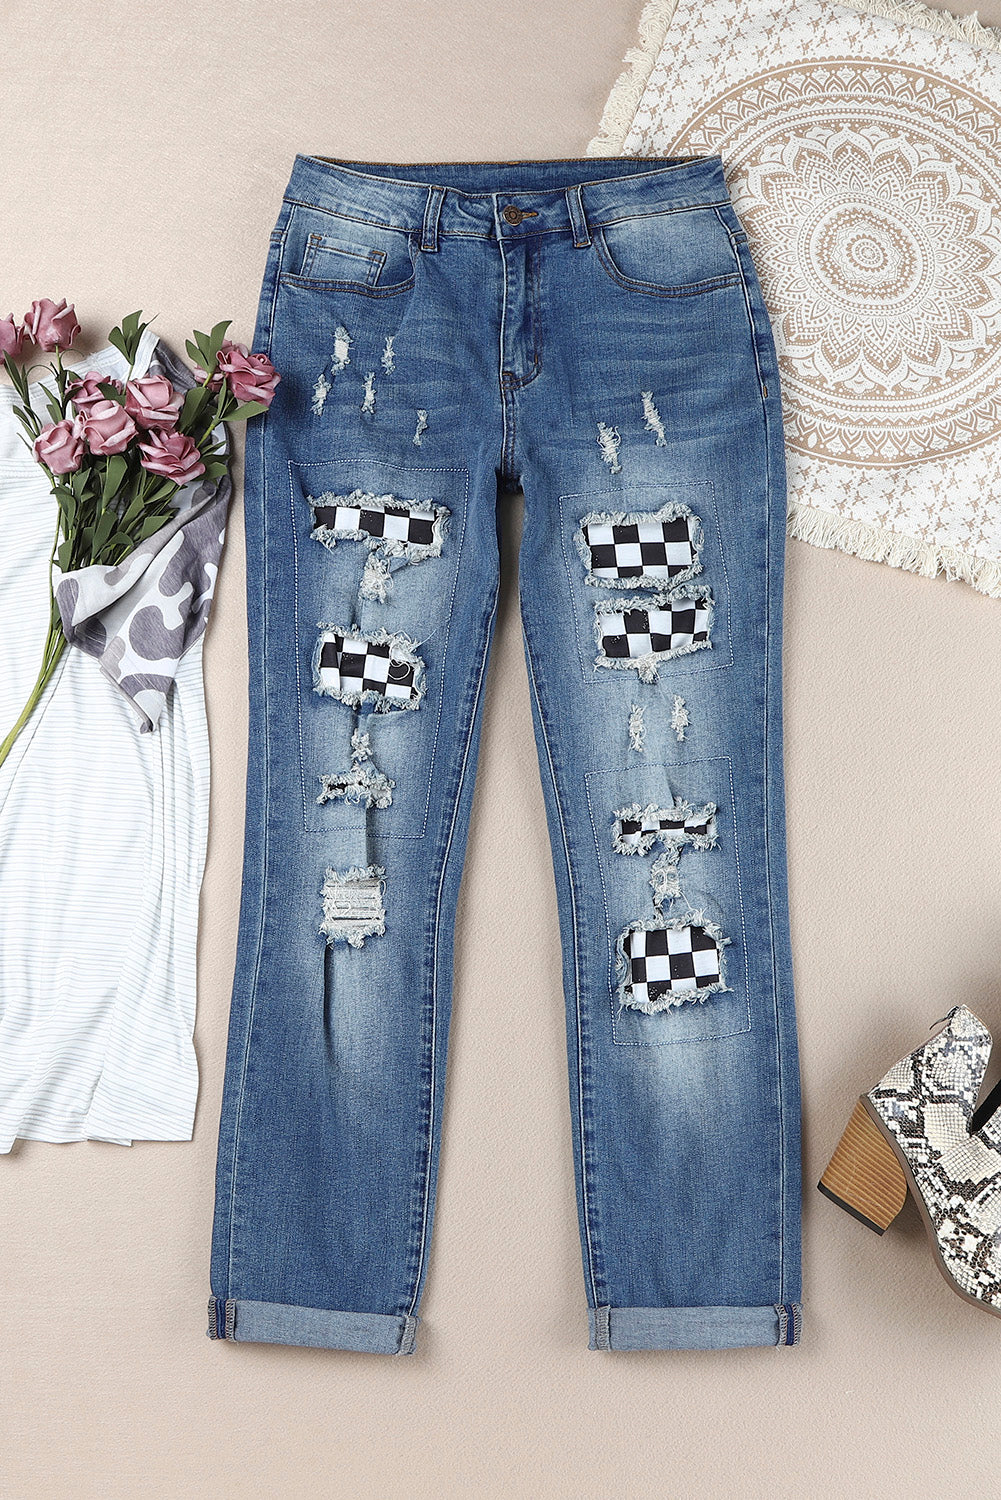 Baeful Checkered Patchwork Mid Waist Distressed Jeans Trendsi